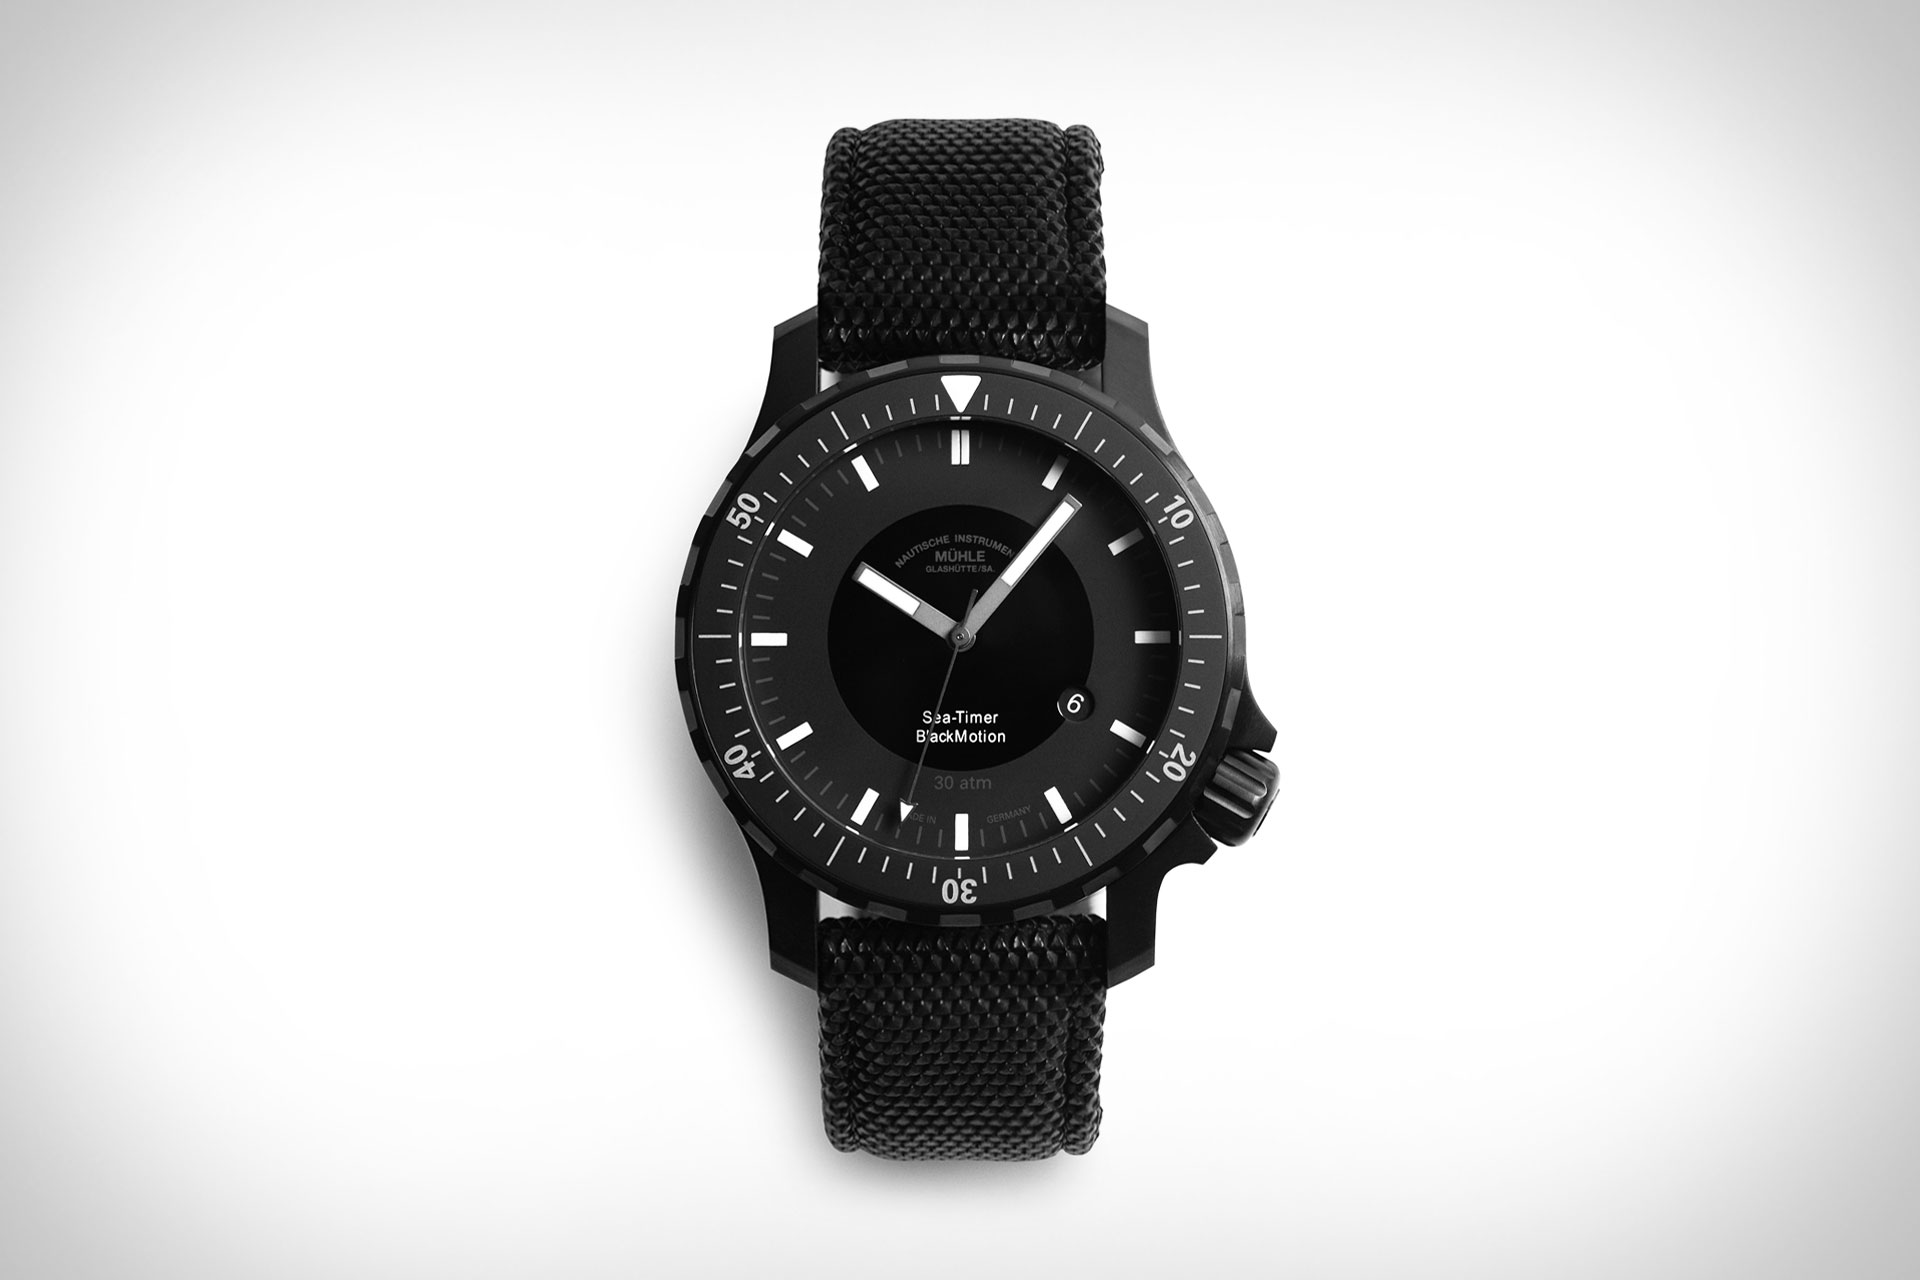 Muehle Glashuette Sea-Timer BlackMotion Watch | Uncrate